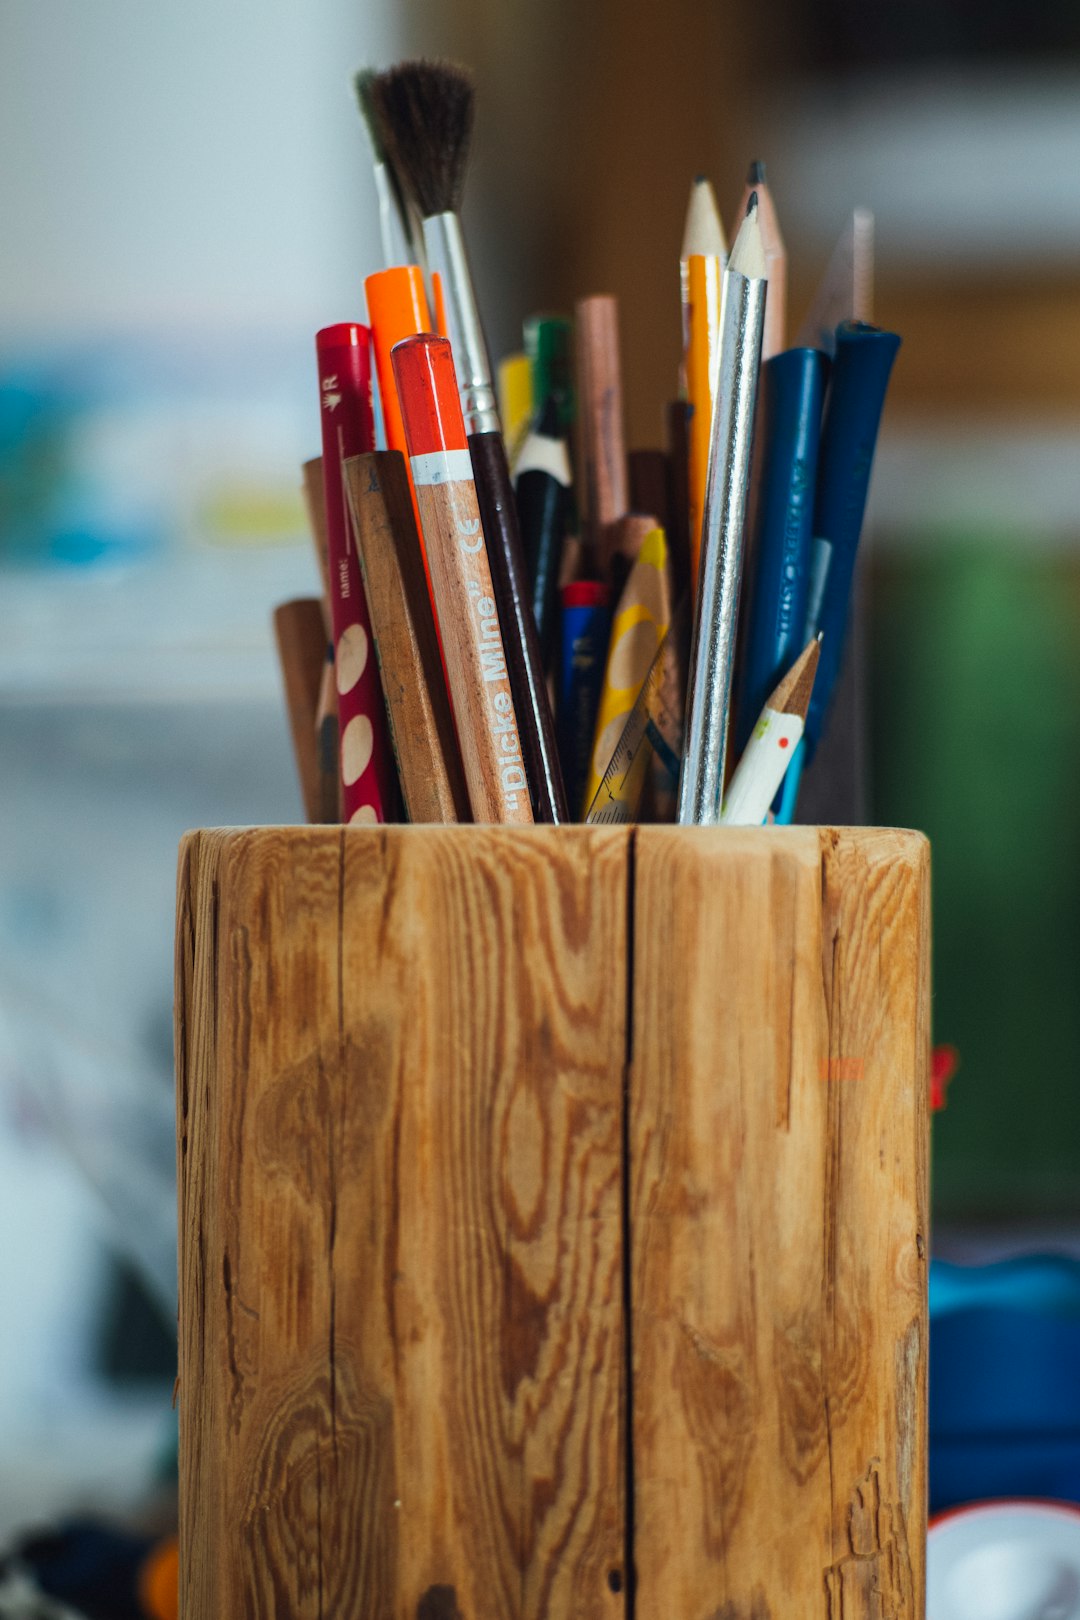 Wooden cup holder with colorful pencils and paintbrushes